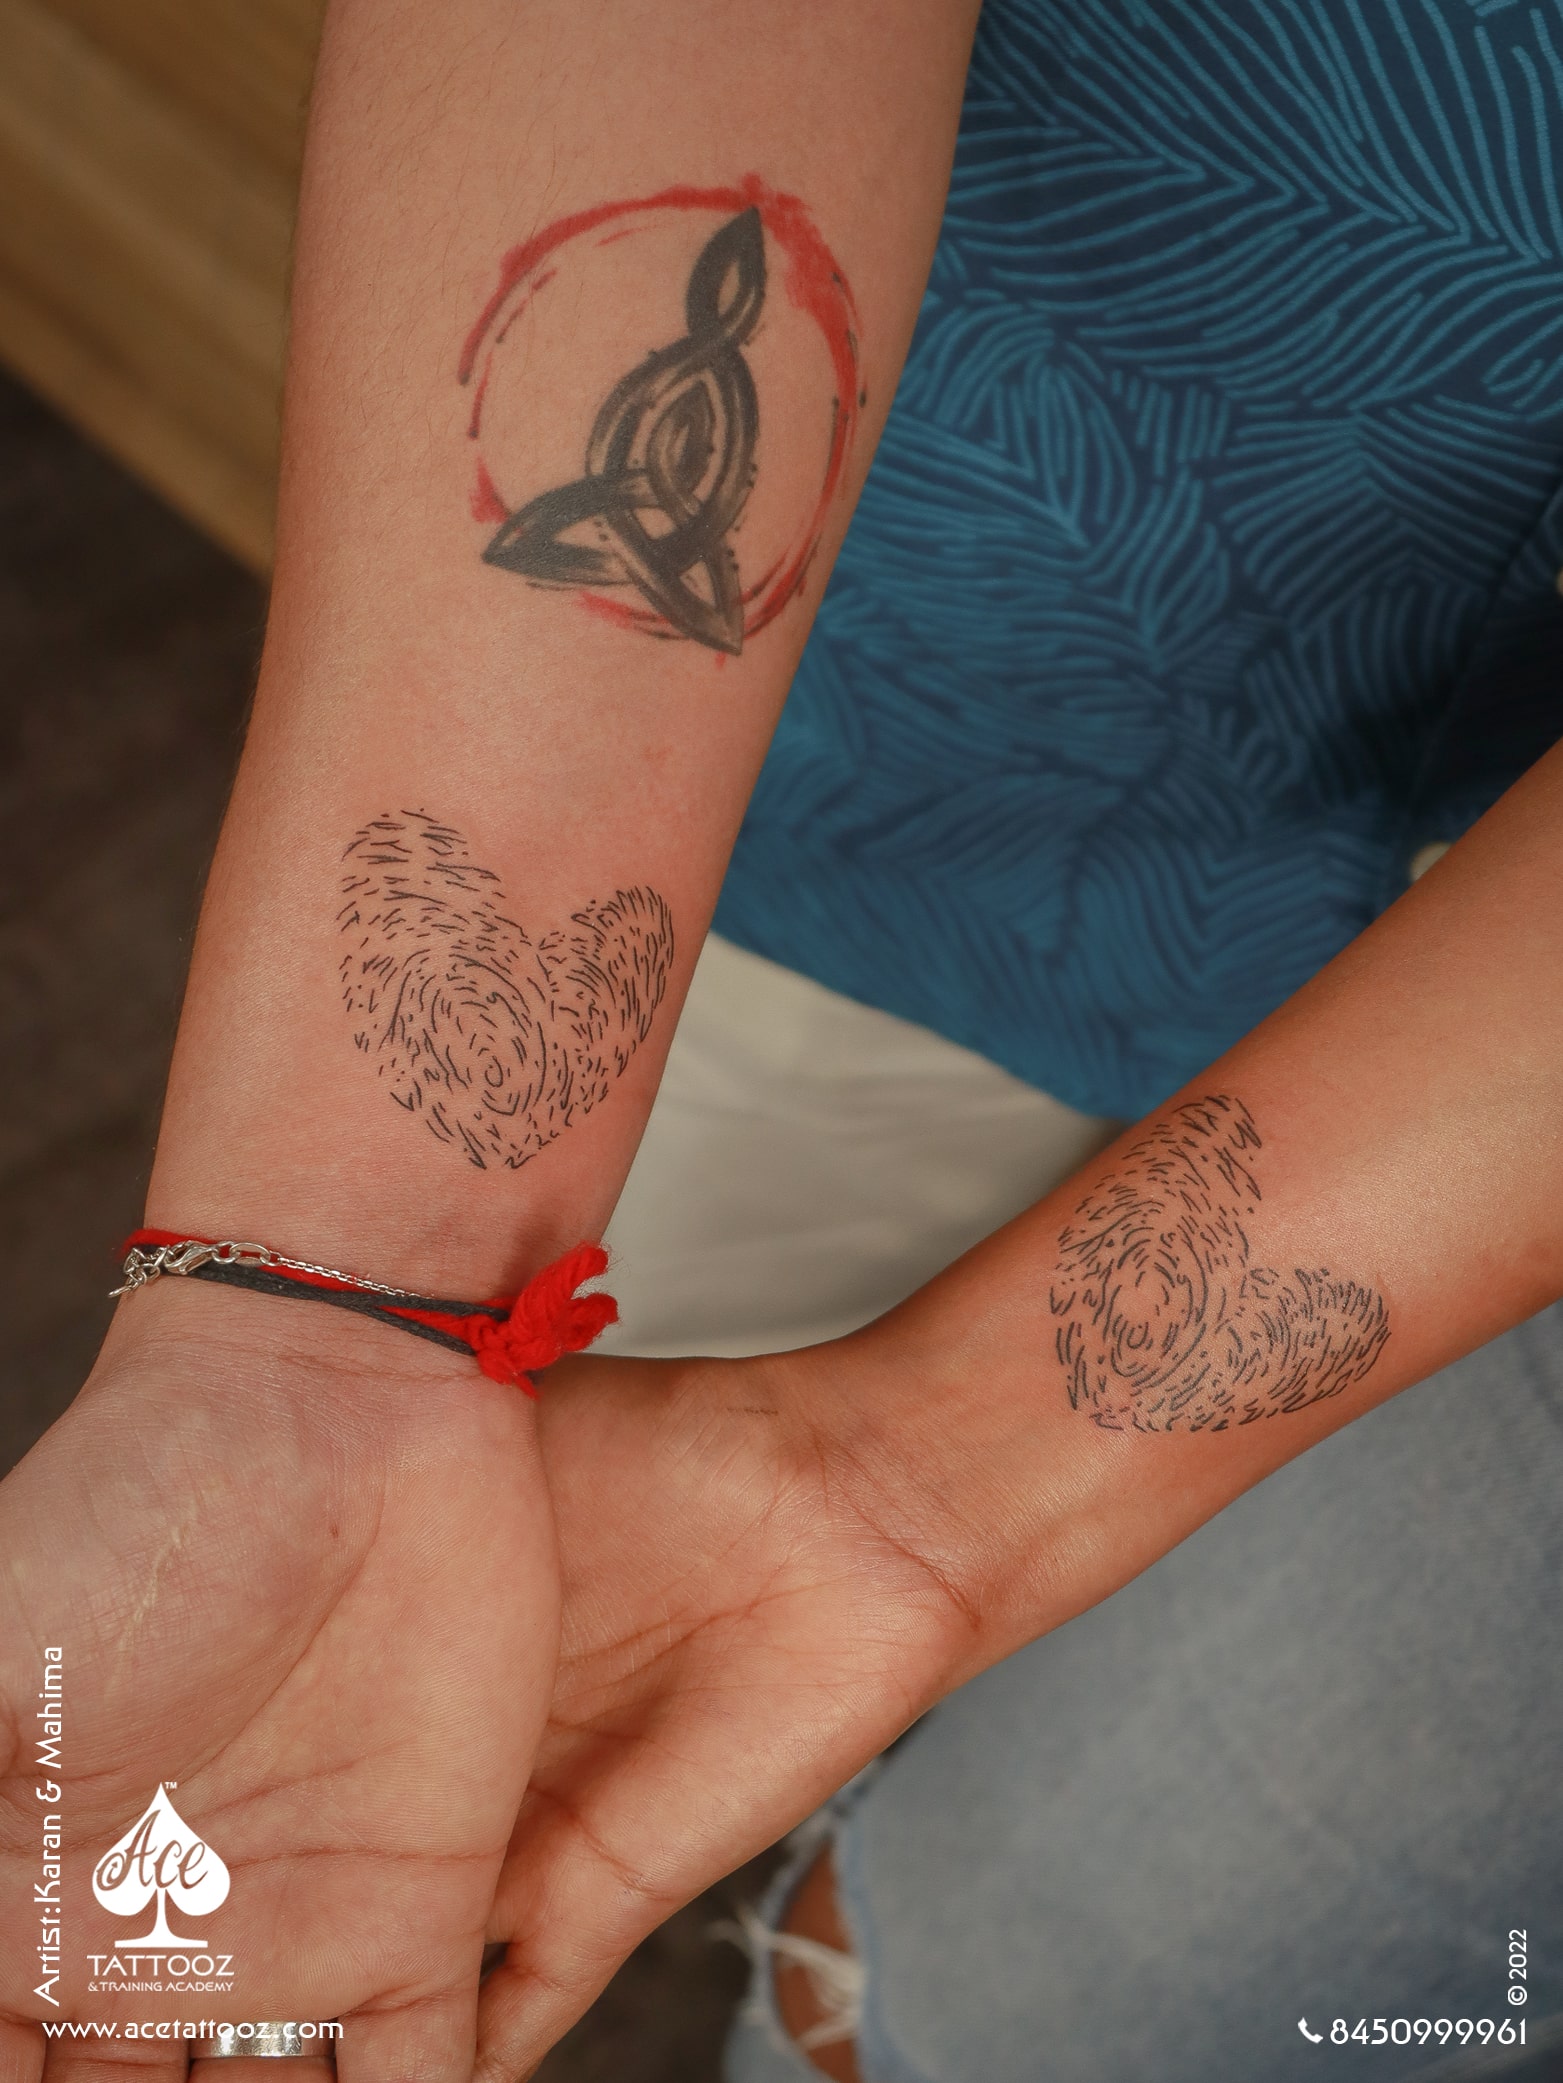 XPOSE TATTOOS JAIPUR a Twitteren Our fingerprint tattoos are a 3Dprinted  replica of the clients or loved ones actual fingerprint customized via  computer to create a tattoo that is as personal and